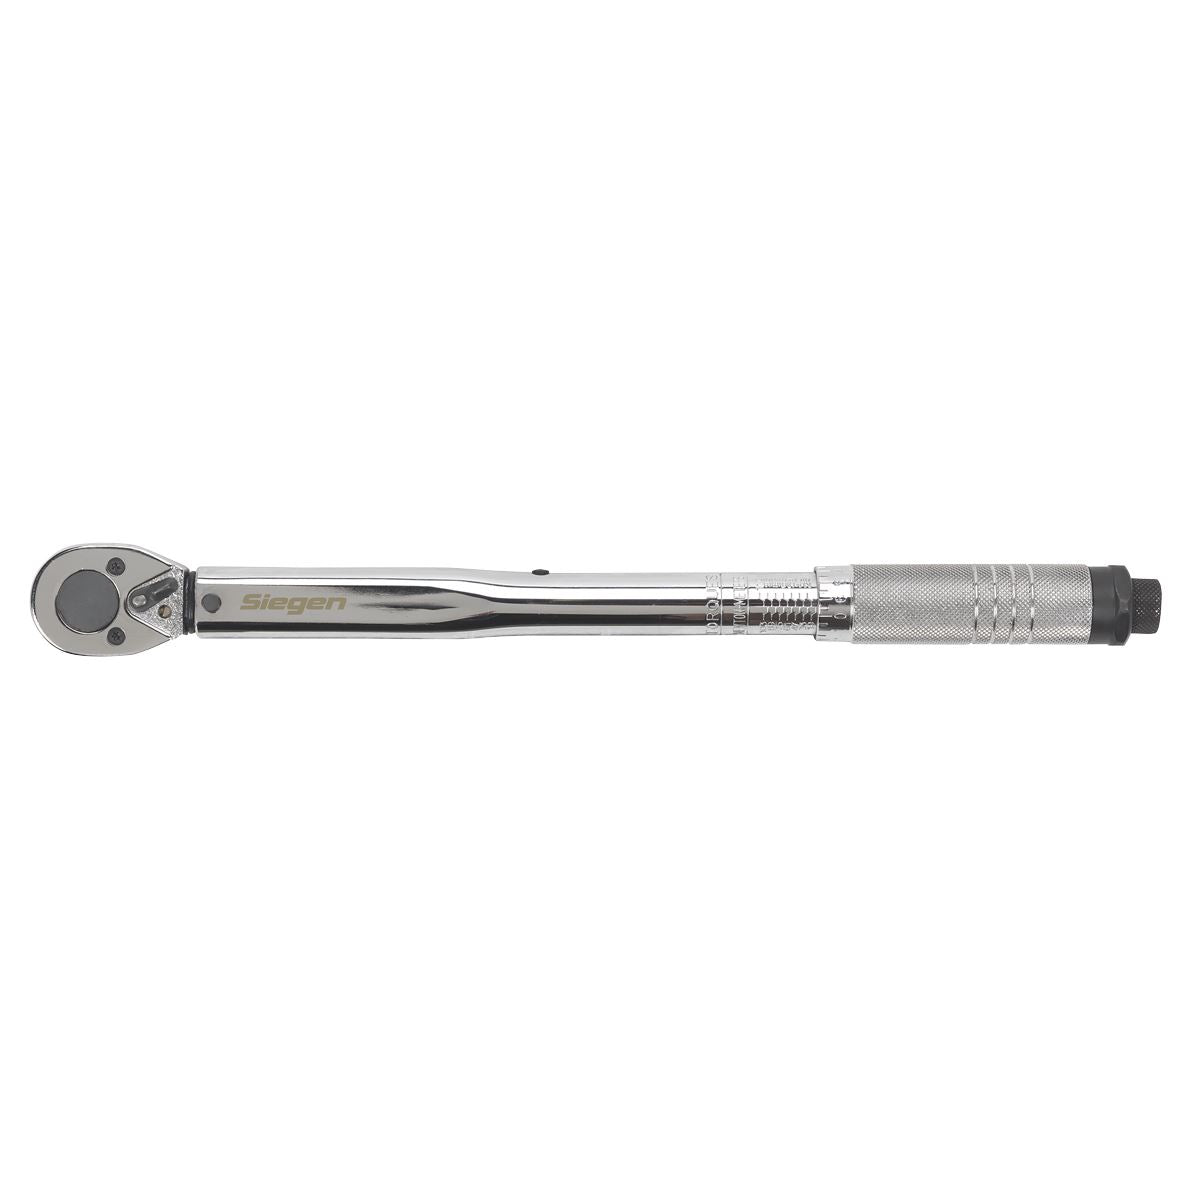 Sealey Torque Wrench 3/8"Sq Drive S0455